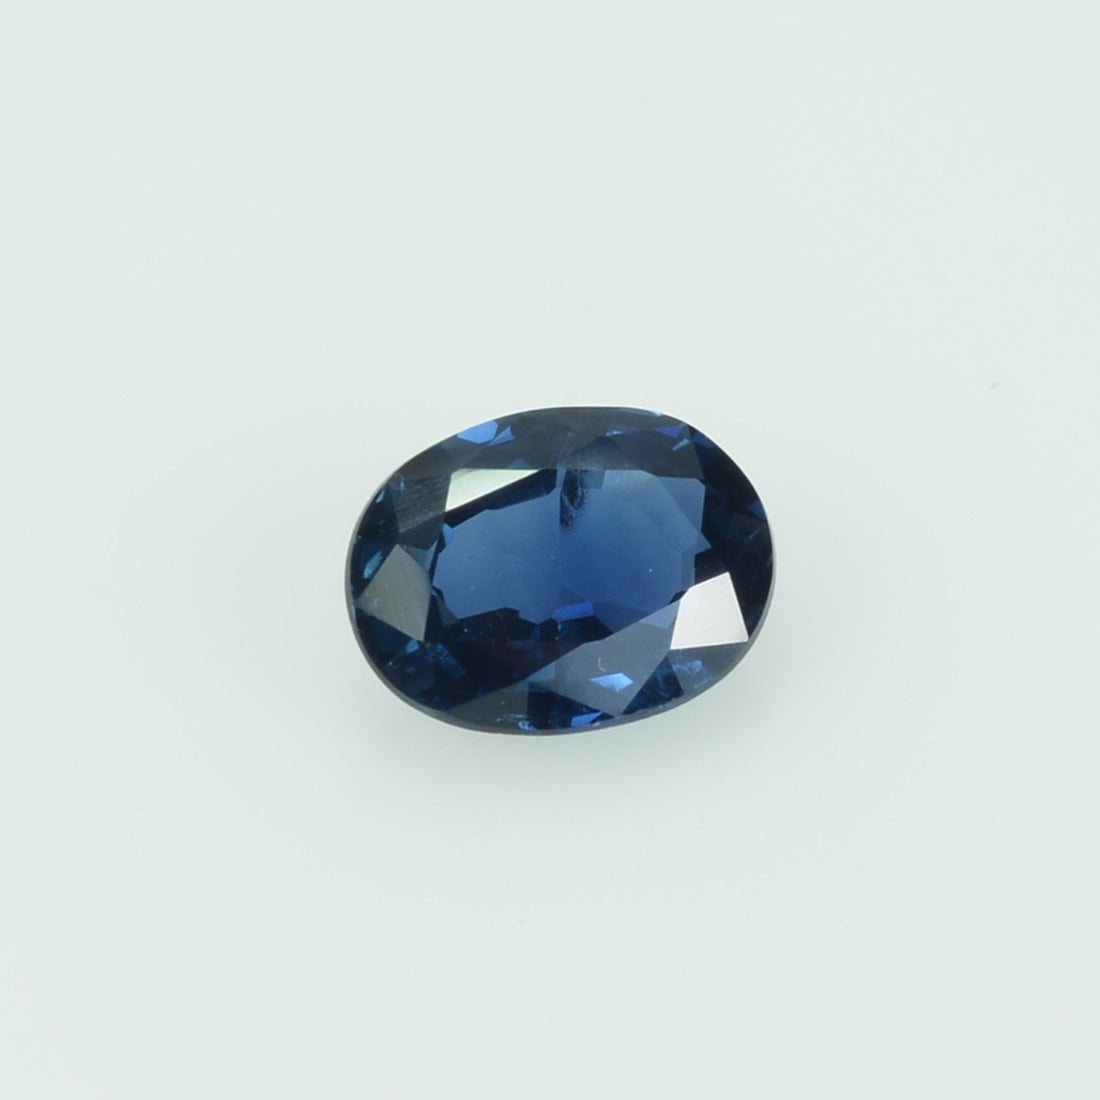 0.64 cts natural blue sapphire loose gemstone oval cut